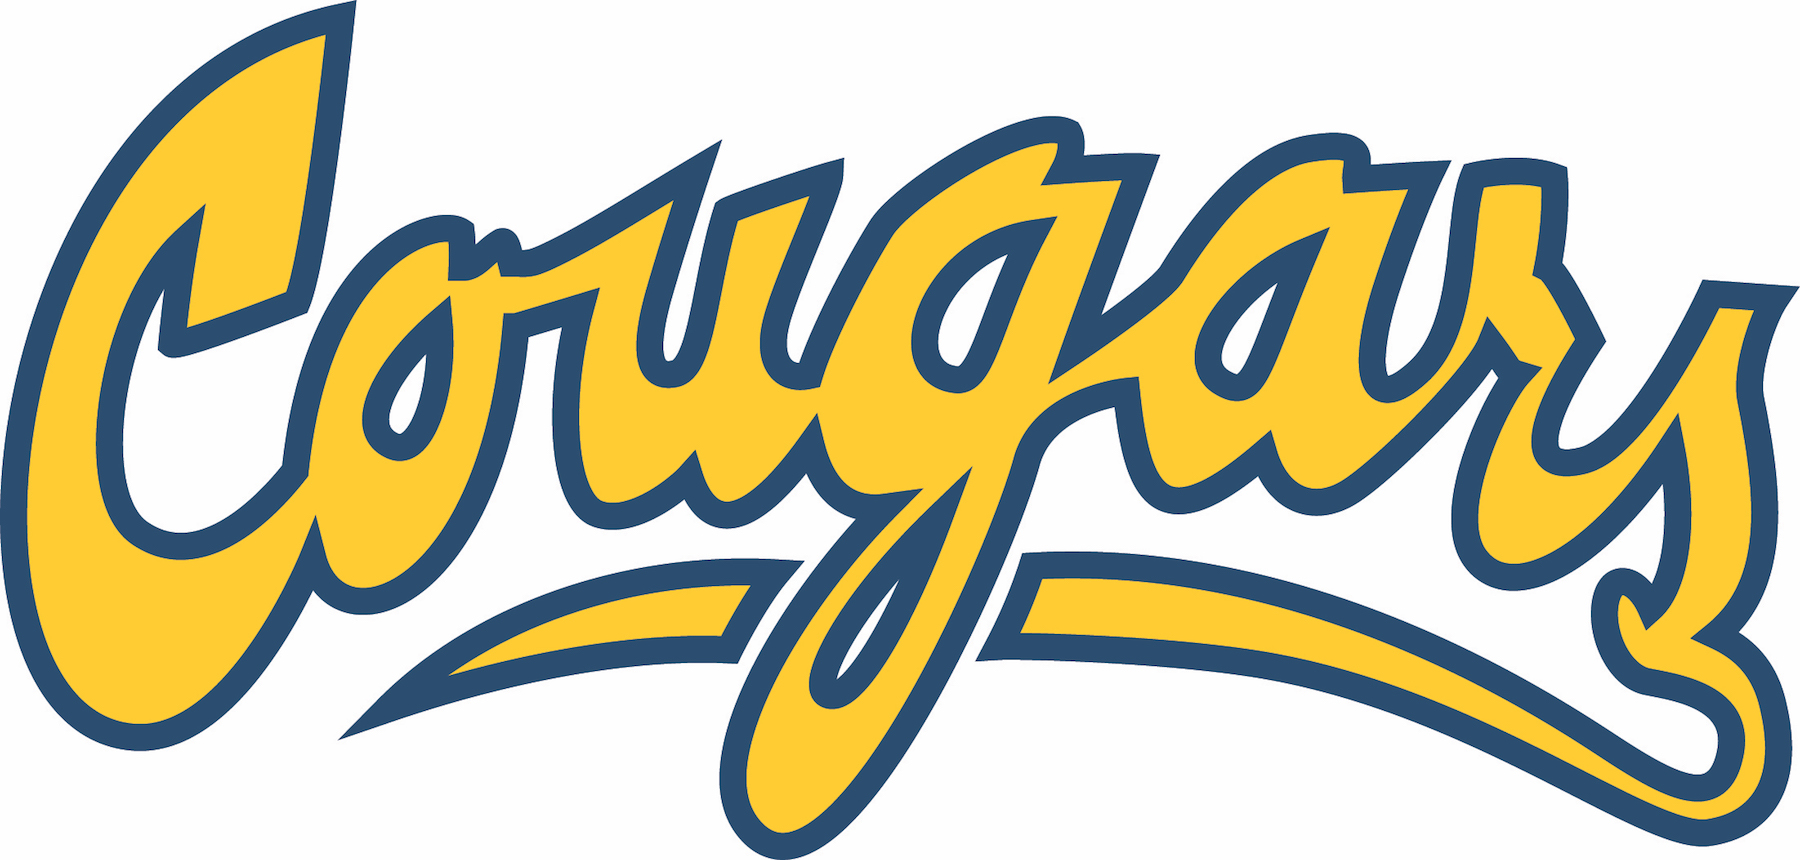 College of the Canyons Cougars script logo.